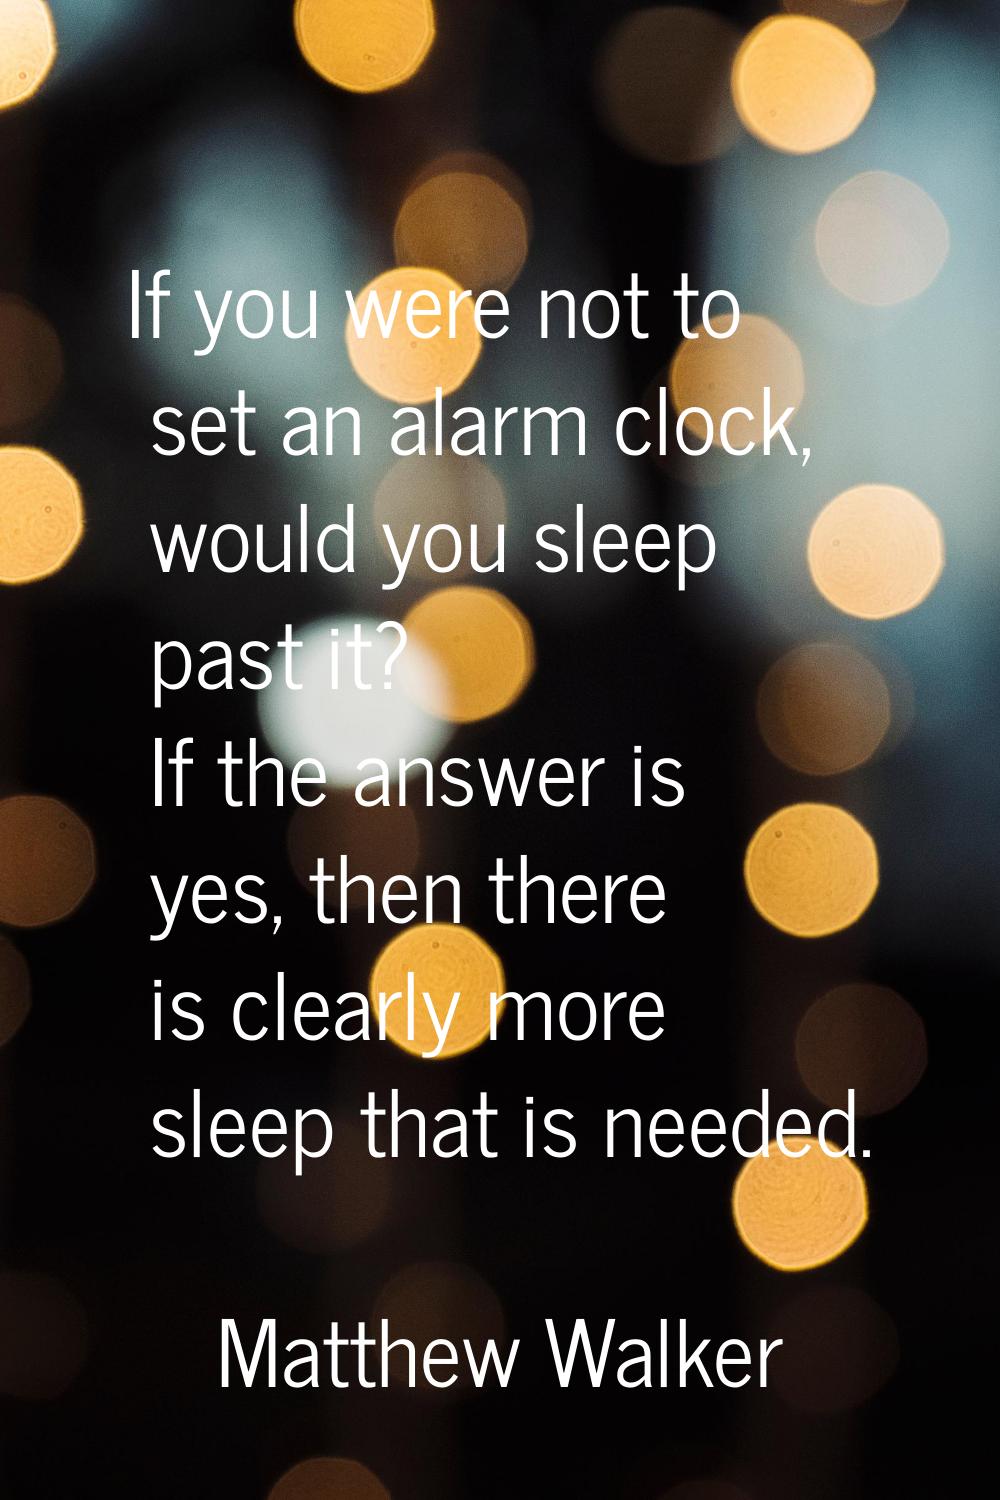 If you were not to set an alarm clock, would you sleep past it? If the answer is yes, then there is